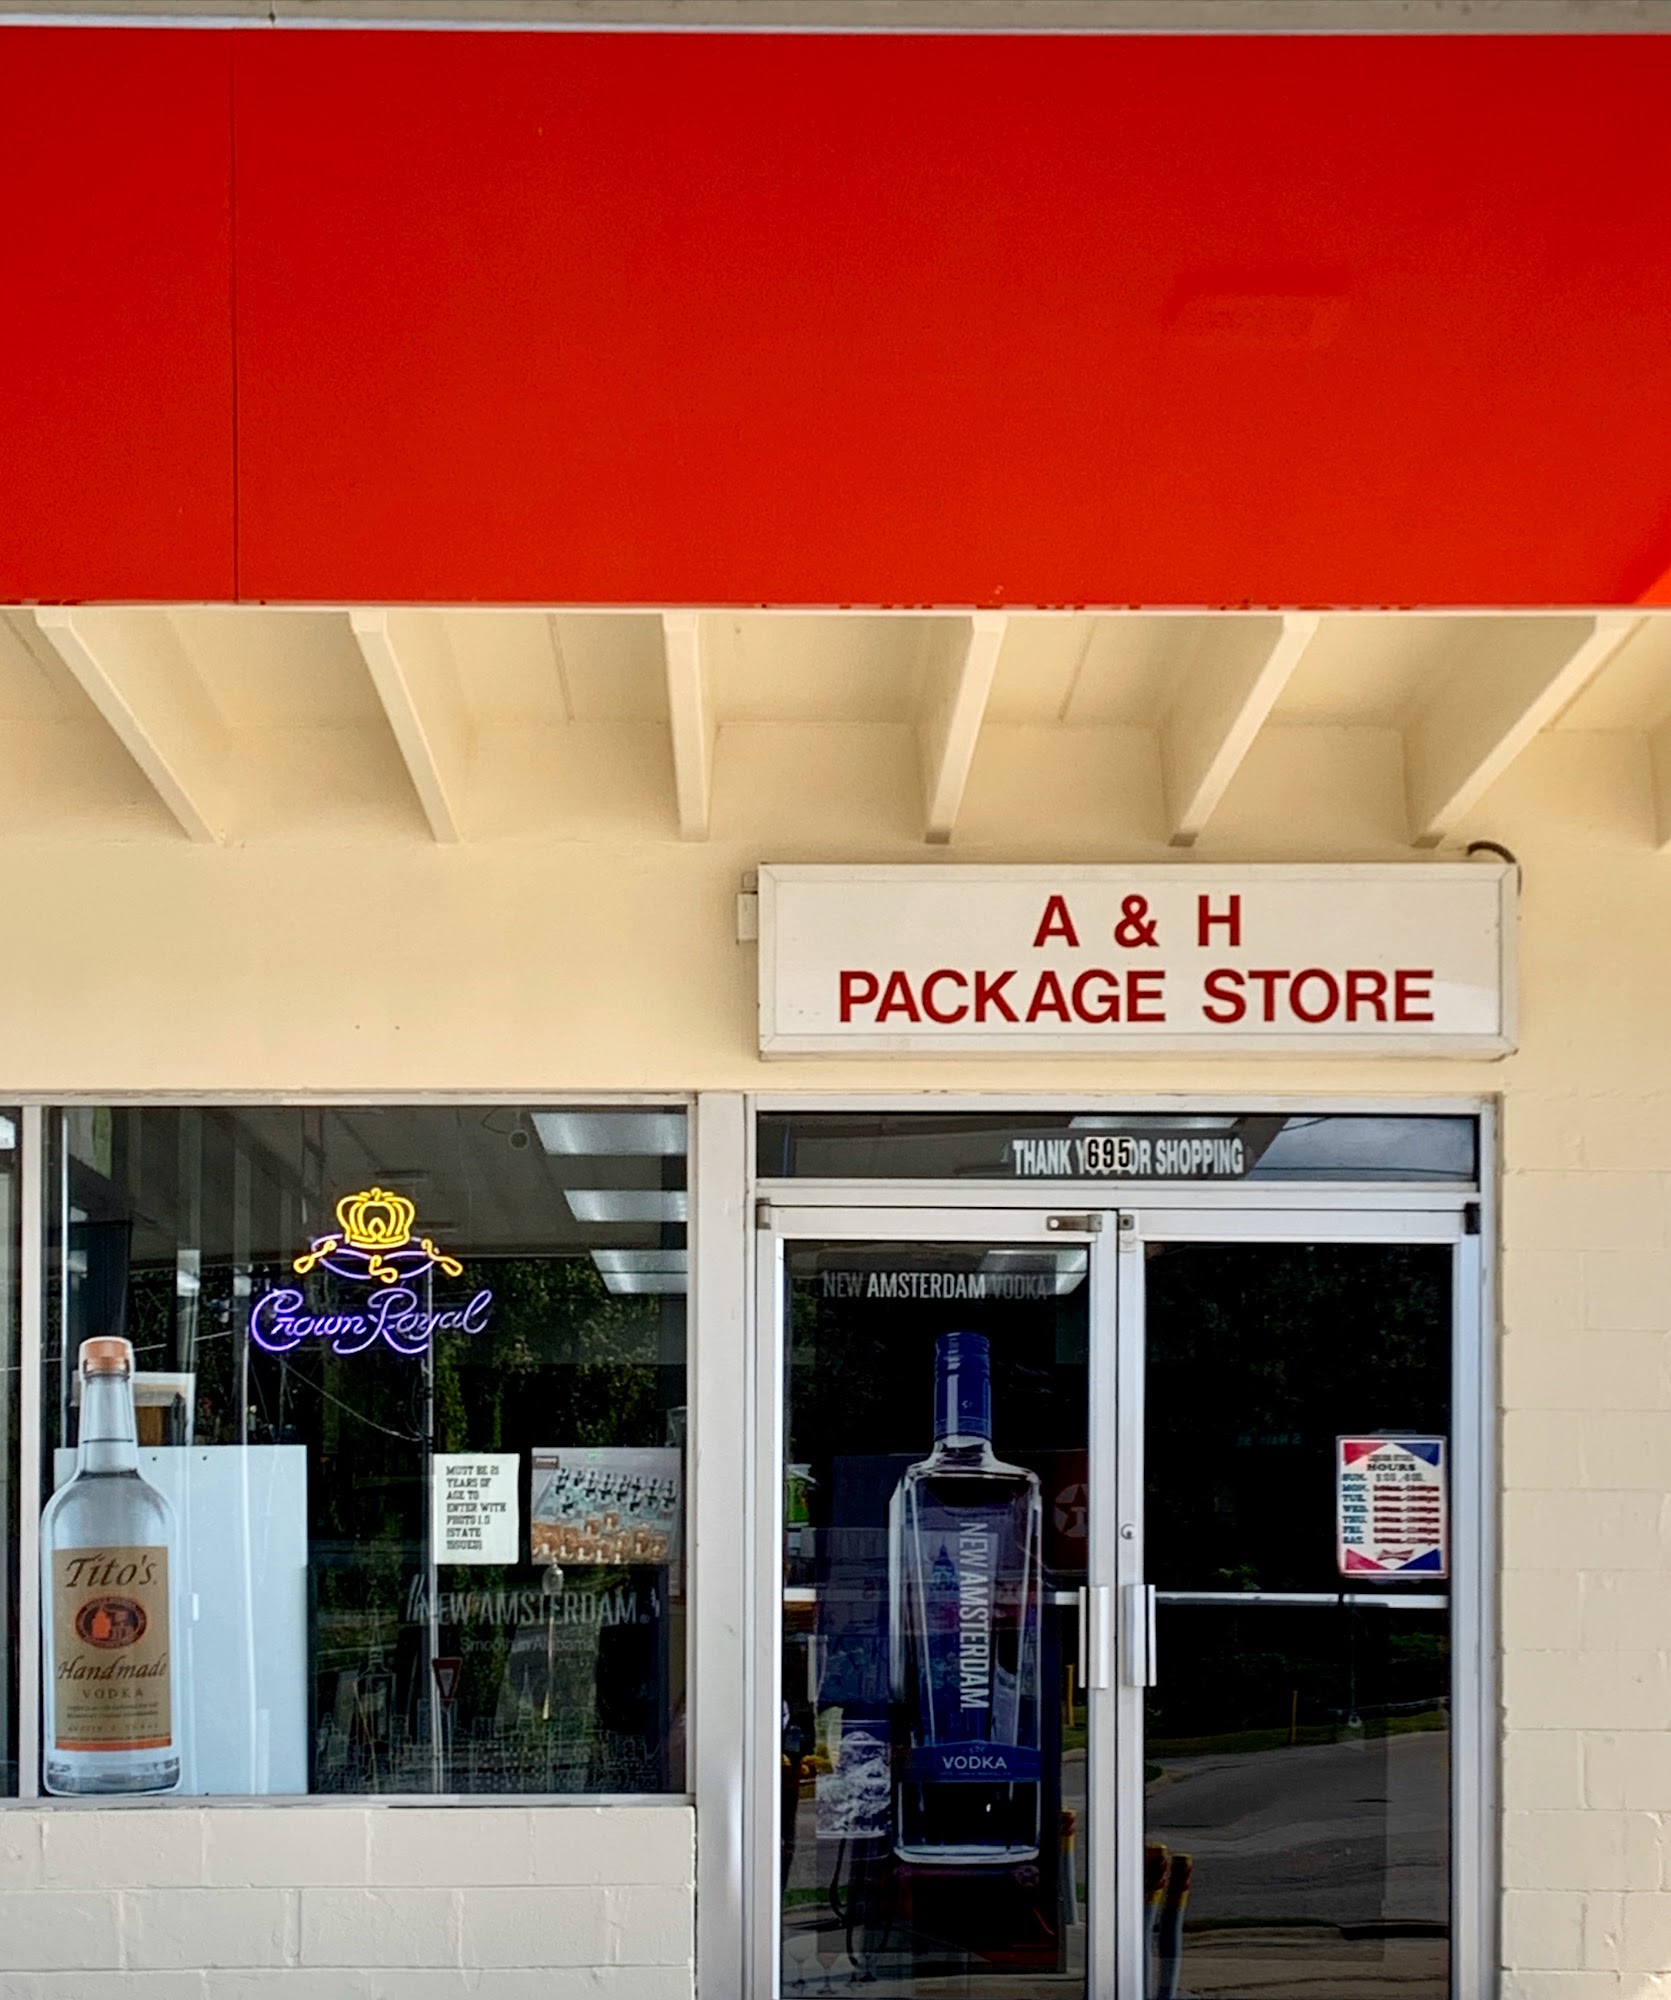 A&H Package Store